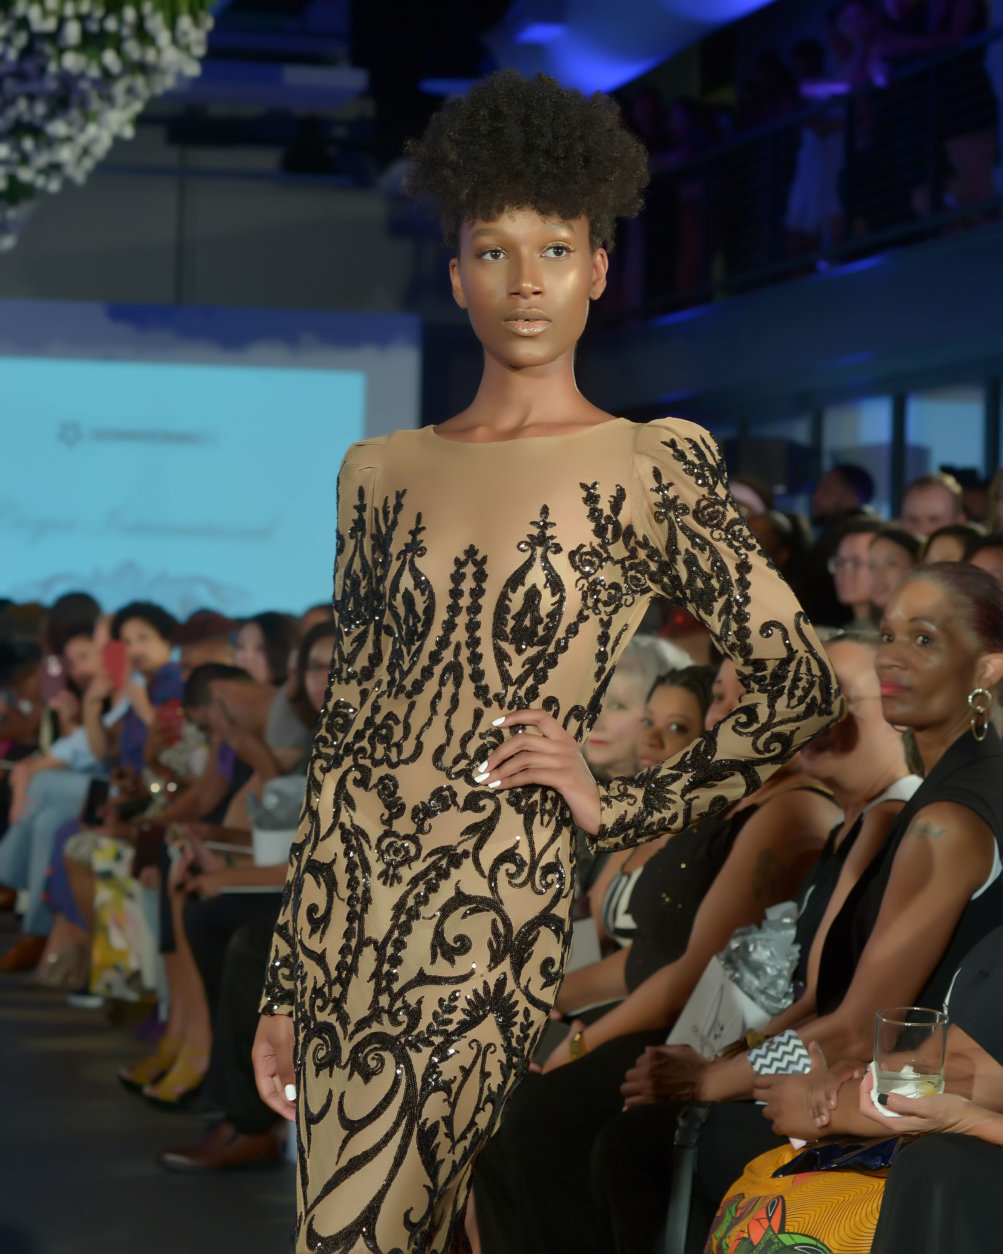 A model wears pieces from Corjor International's Spring/Summer 2019 collection at the DowntownDC Business Improvement District (BID) District of Fashion runway show. (Courtesy Shannon Finney/<a href="https://www.shannonfinneyphotography.com/index" target="_blank" rel="noopener noreferrer">shannonfinneyphotography.com</a>) 